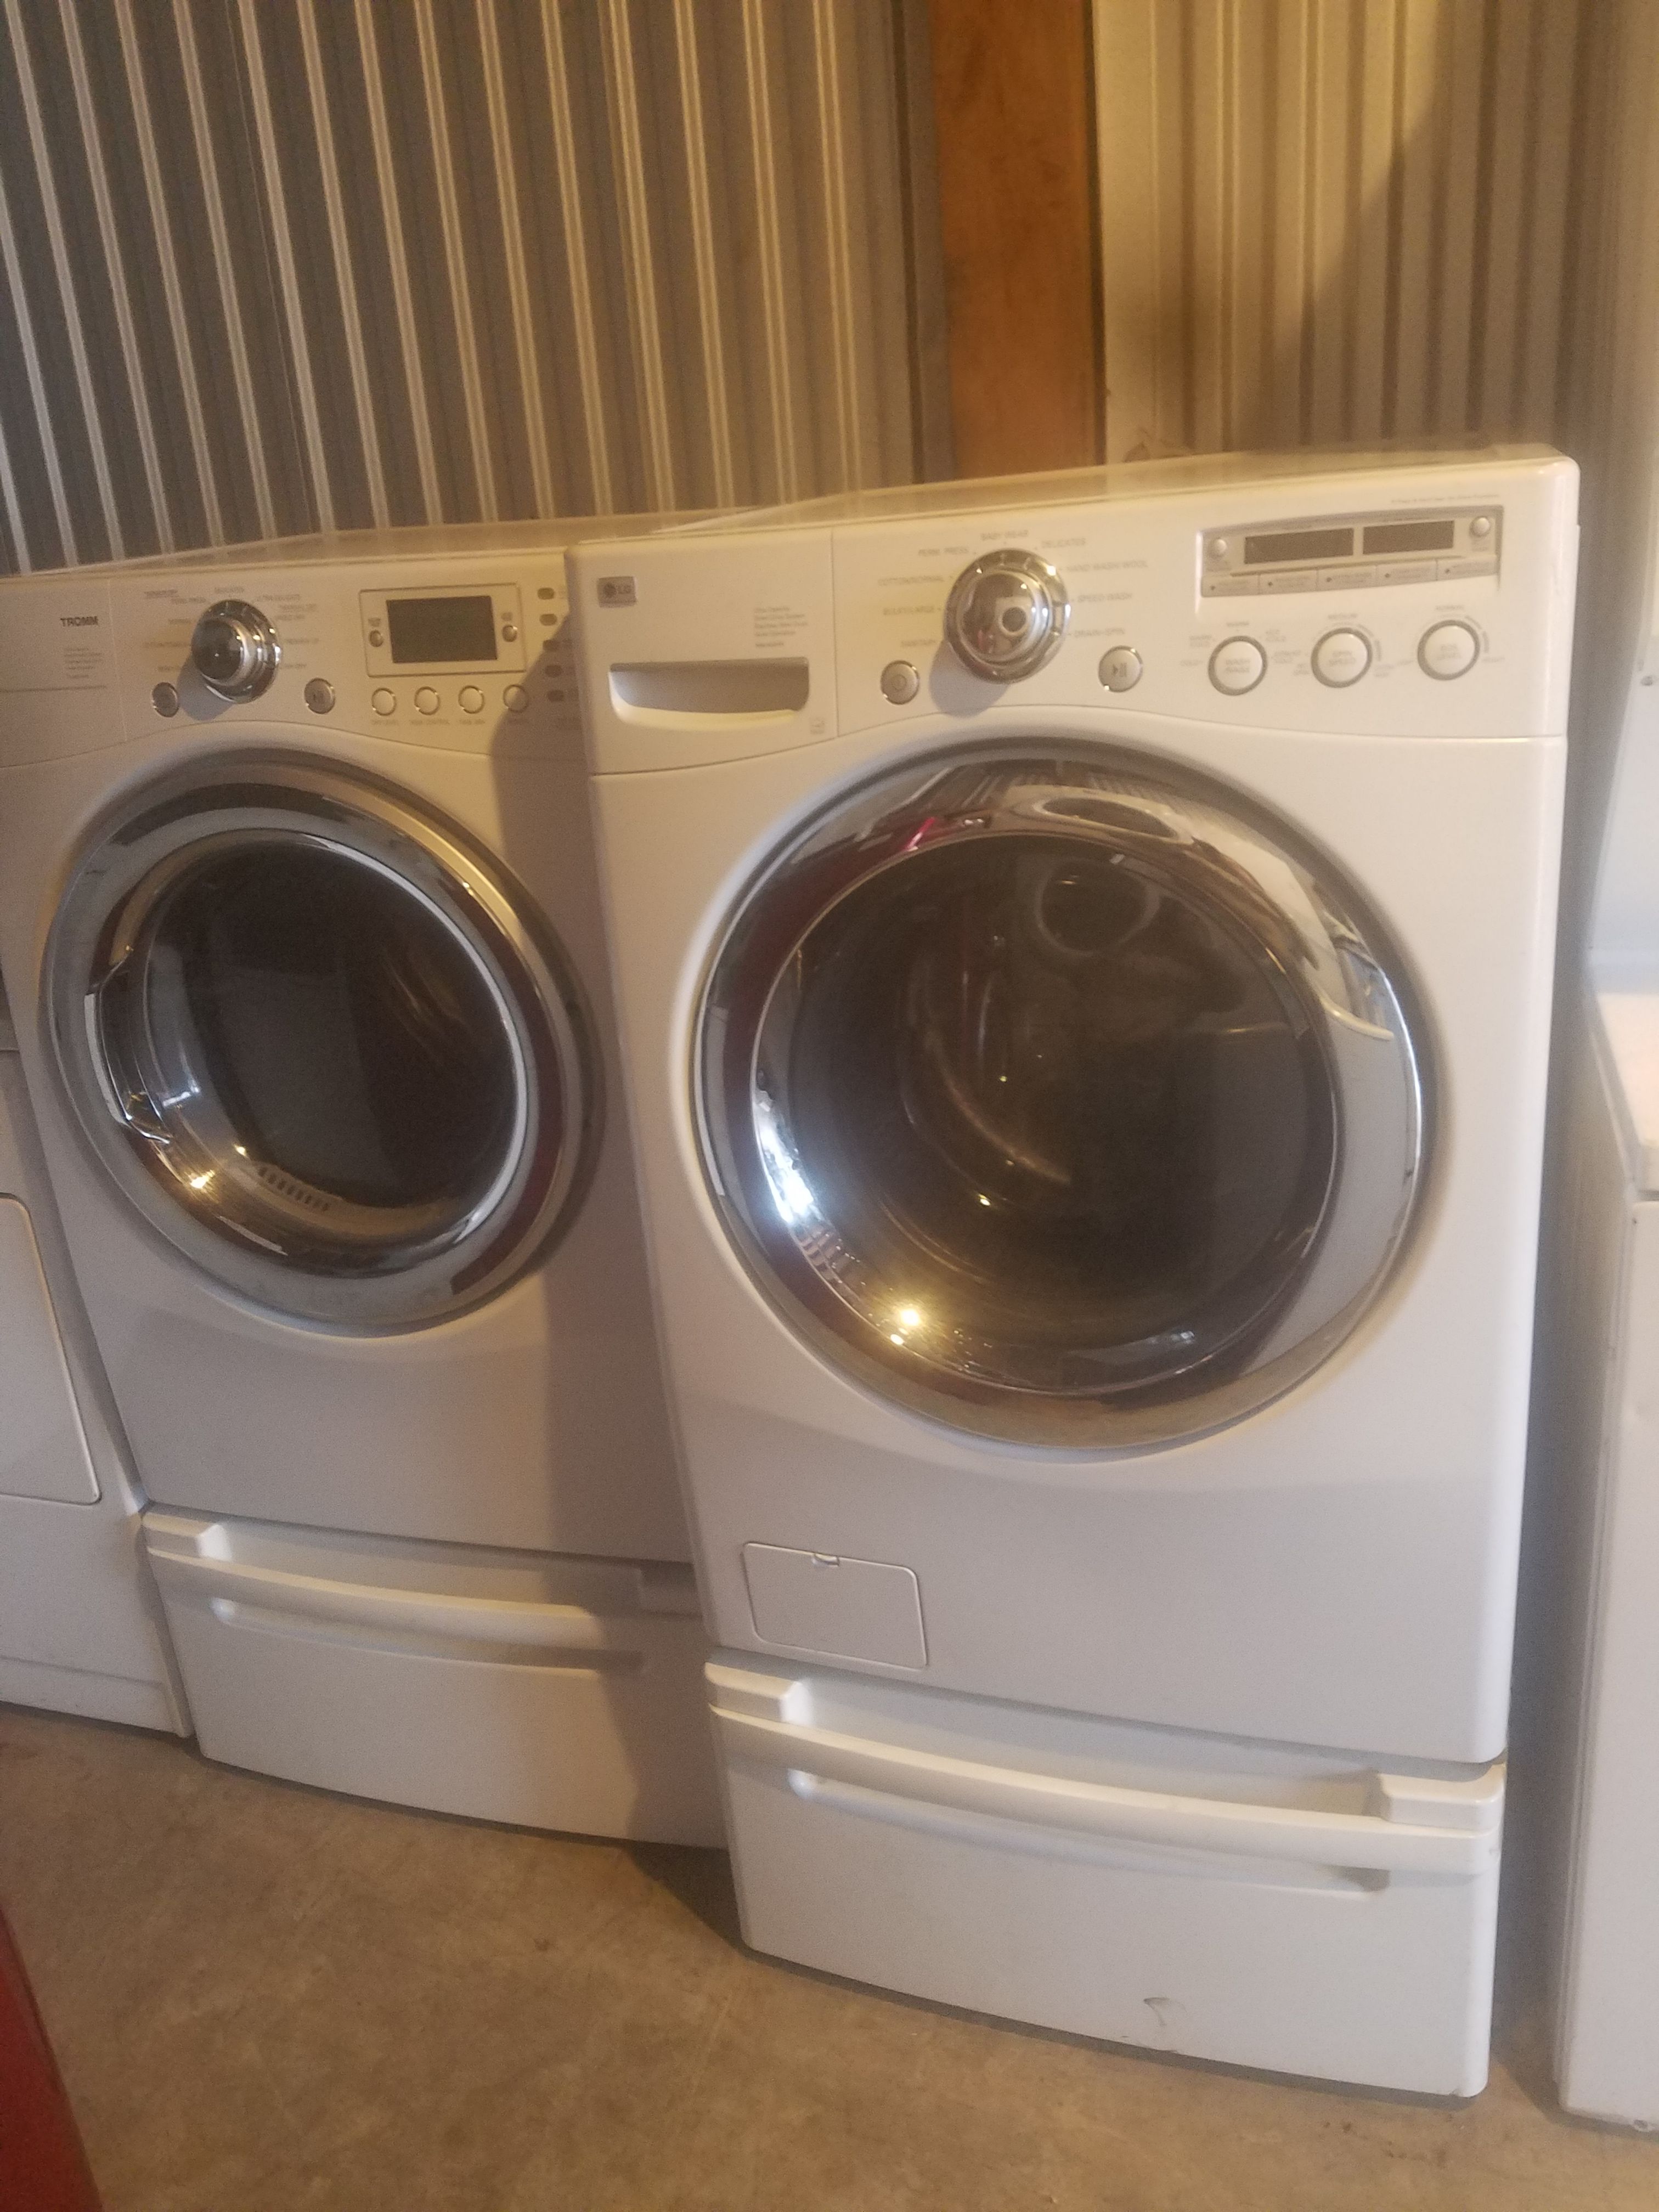 Washer and electric dryer